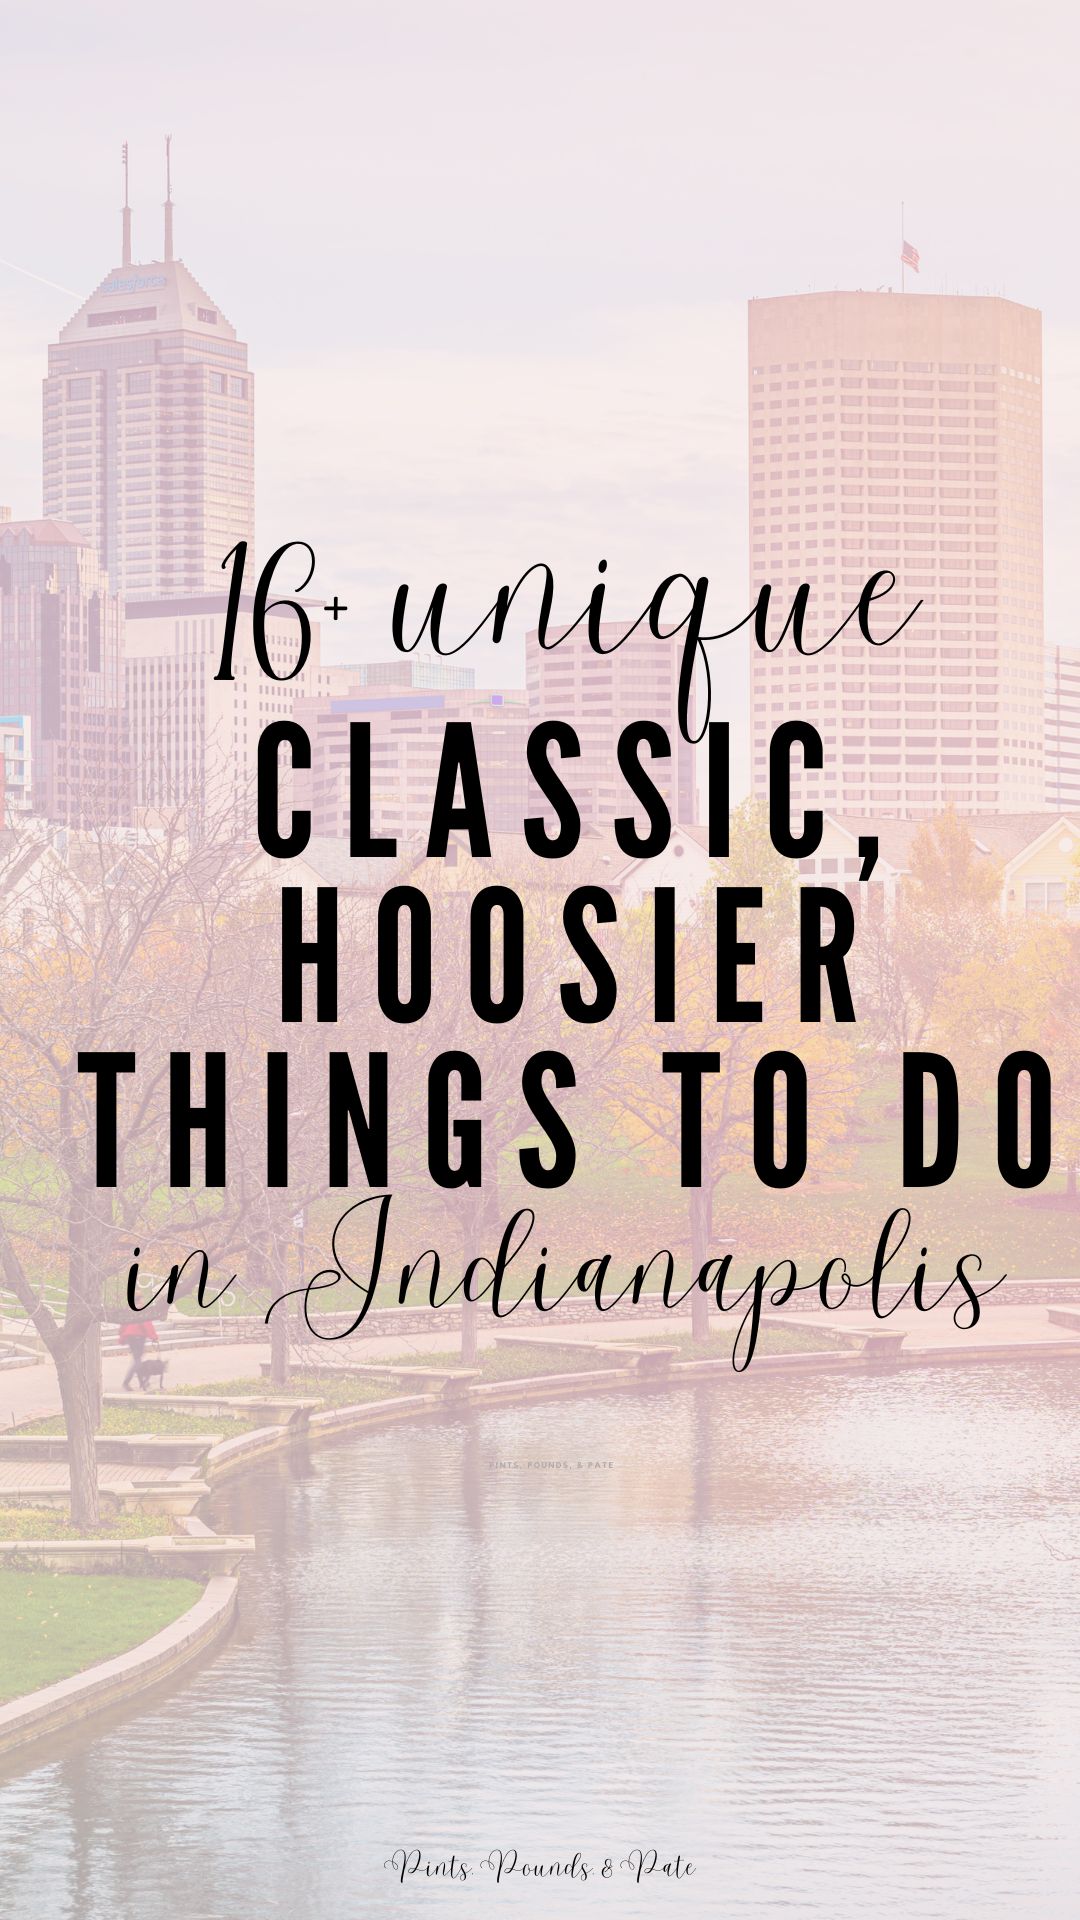 16+ Classic, Hoosier Things to Do in Indianapolis, Indiana